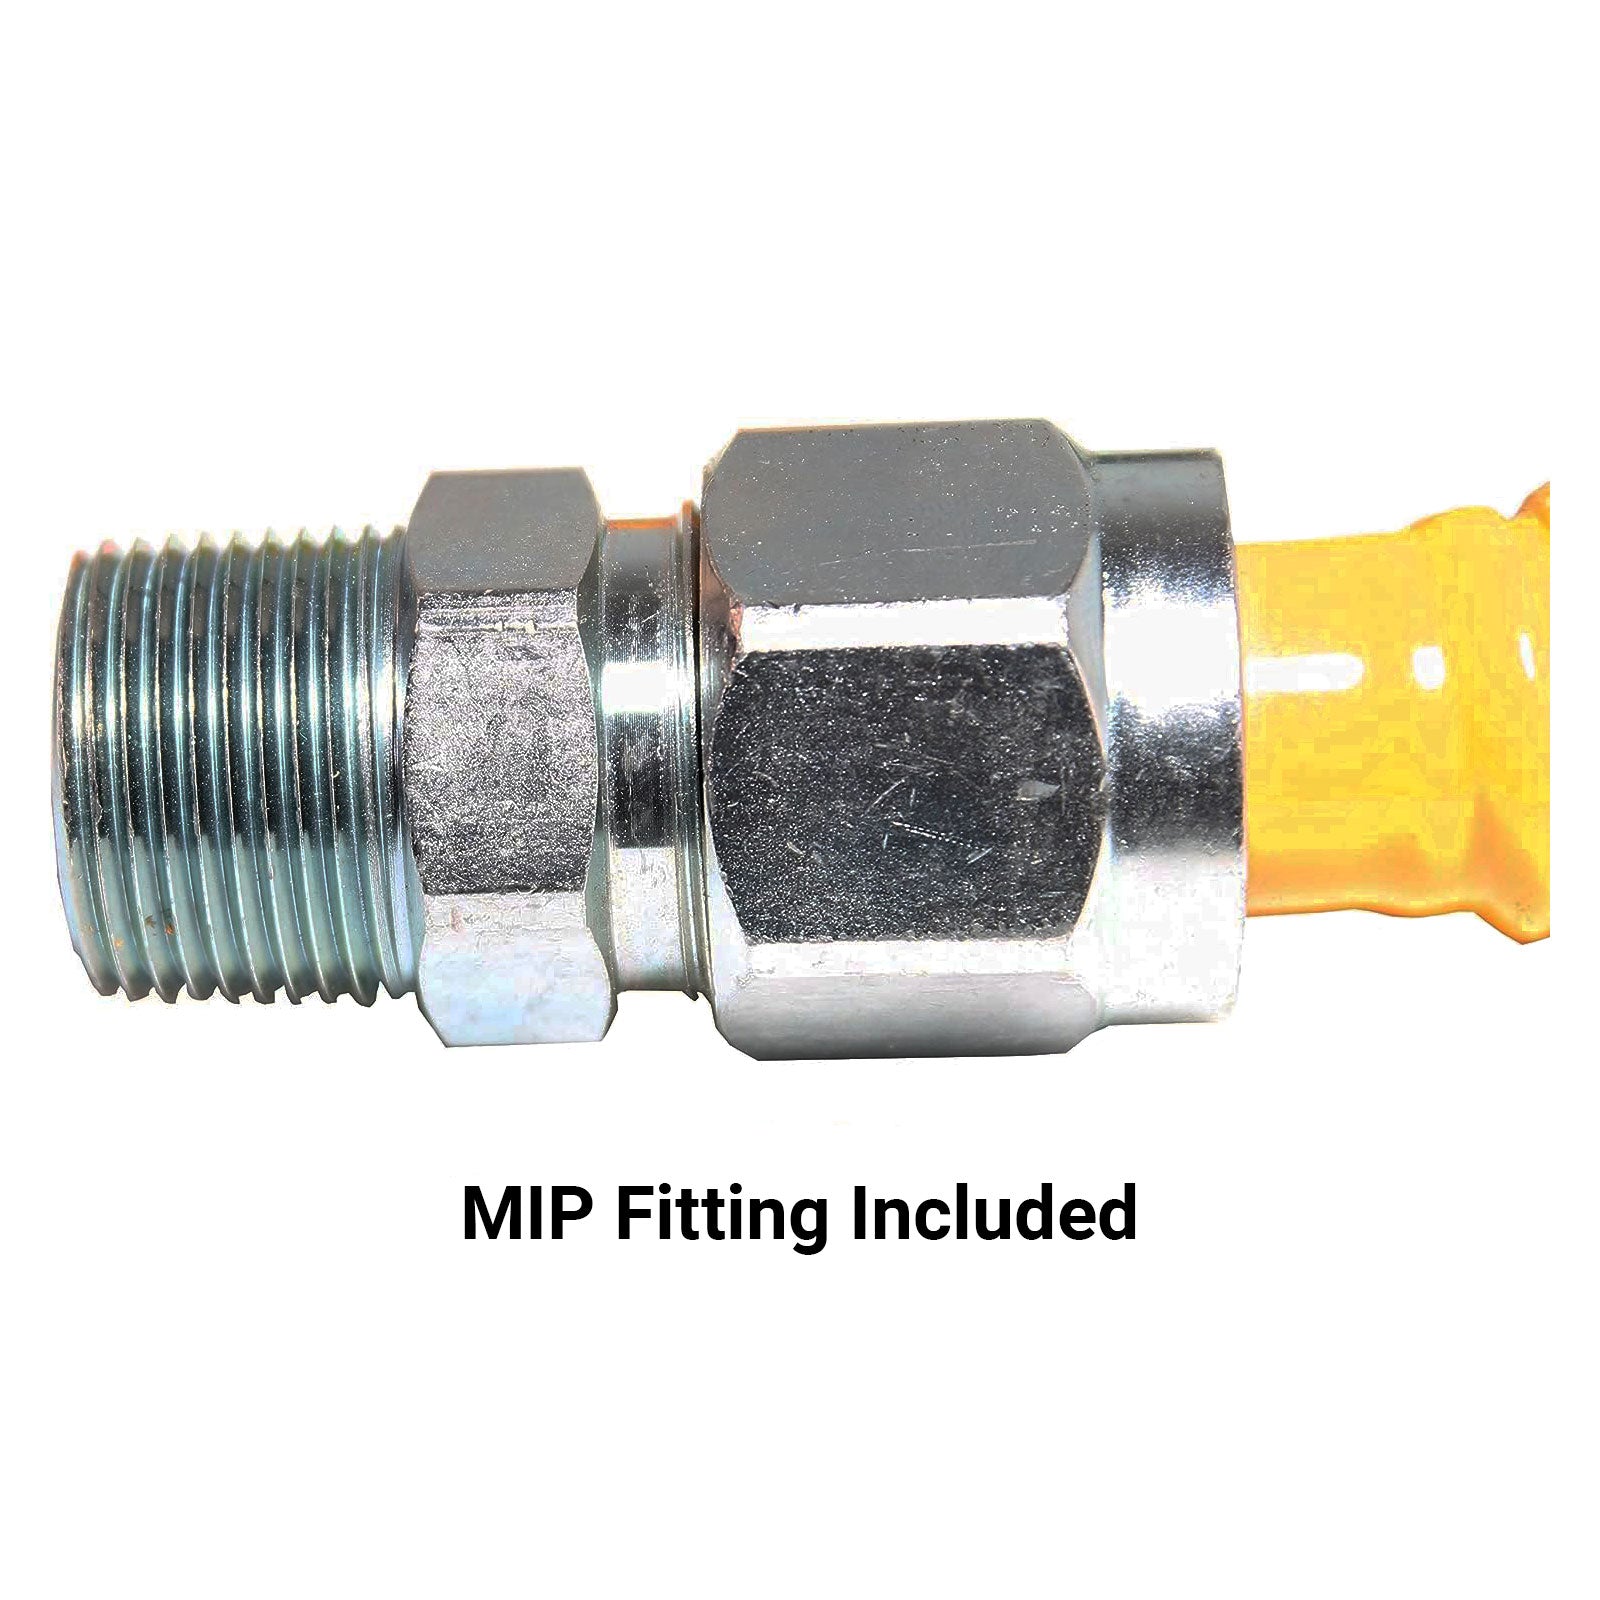 1/2" OD x 60", 1/2" FIP x 1/2" MIP Epoxy Coated Stainless Steel Gas Connector, CSA